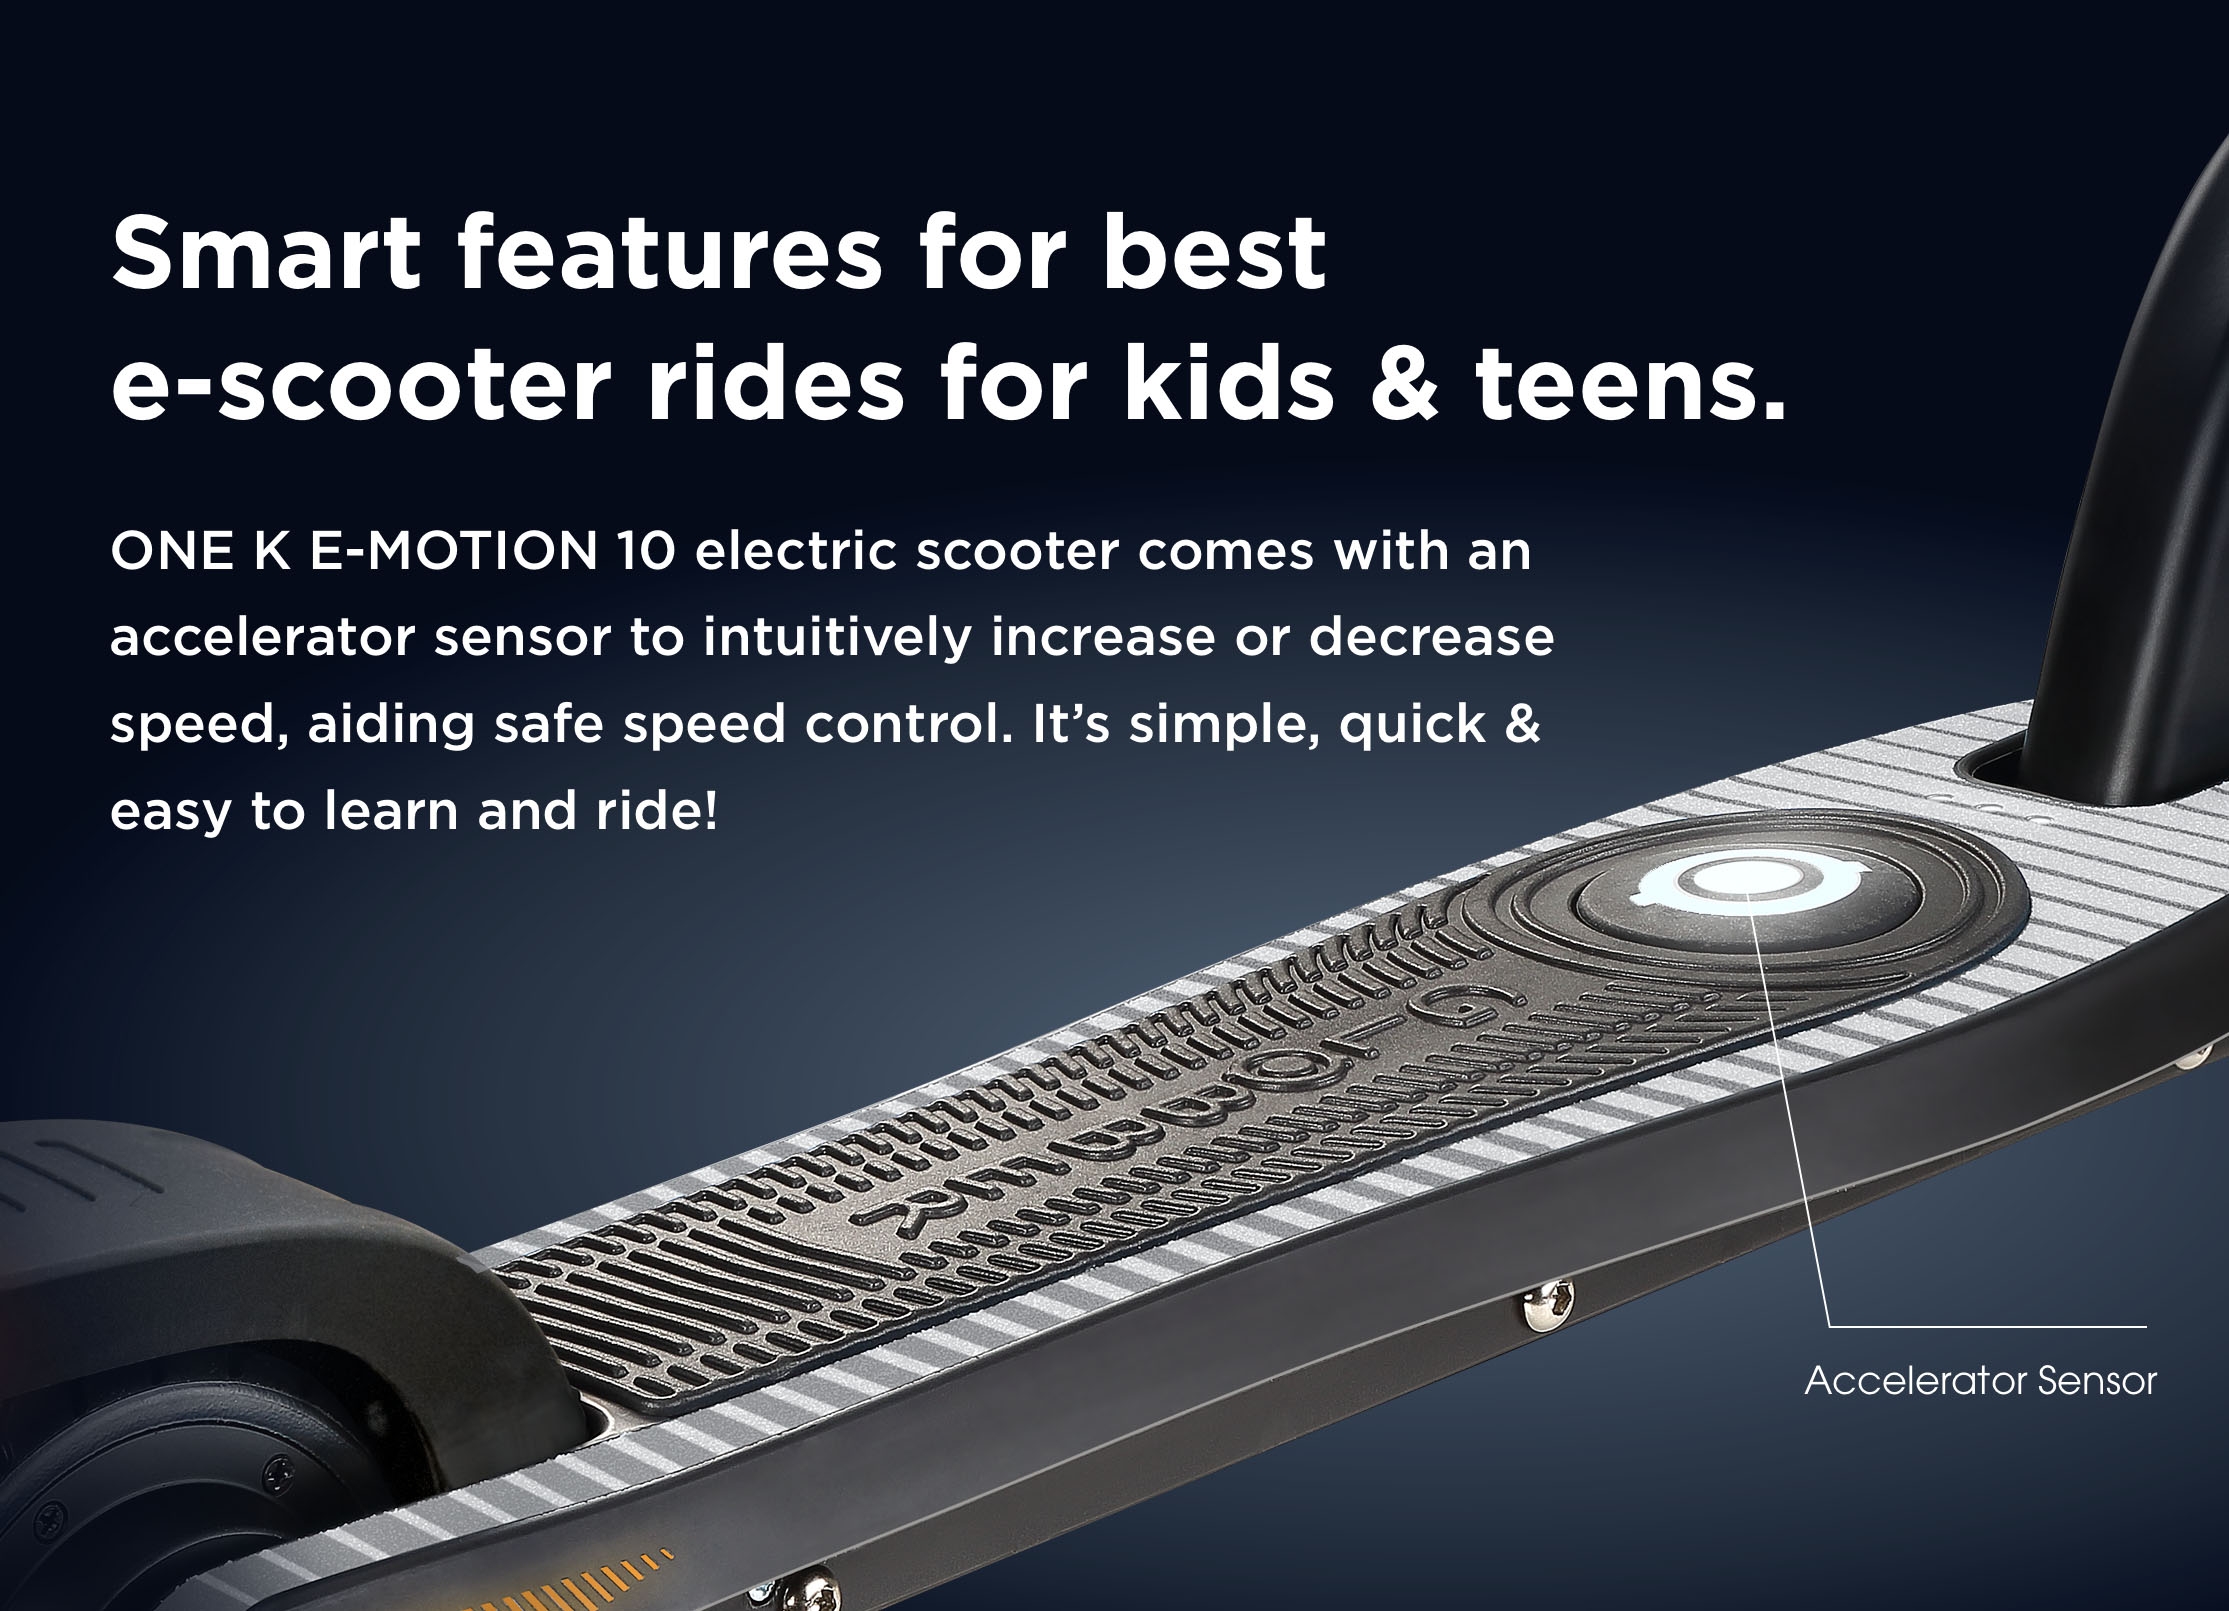 Smart features for best e-scooter rides for kids & teens. ONE K E-MOTION 10 electric scooter comes with an accelerator sensor to intuitively increase or decrease speed, aiding safe speed control. It’s simple, quick & easy to learn and ride!